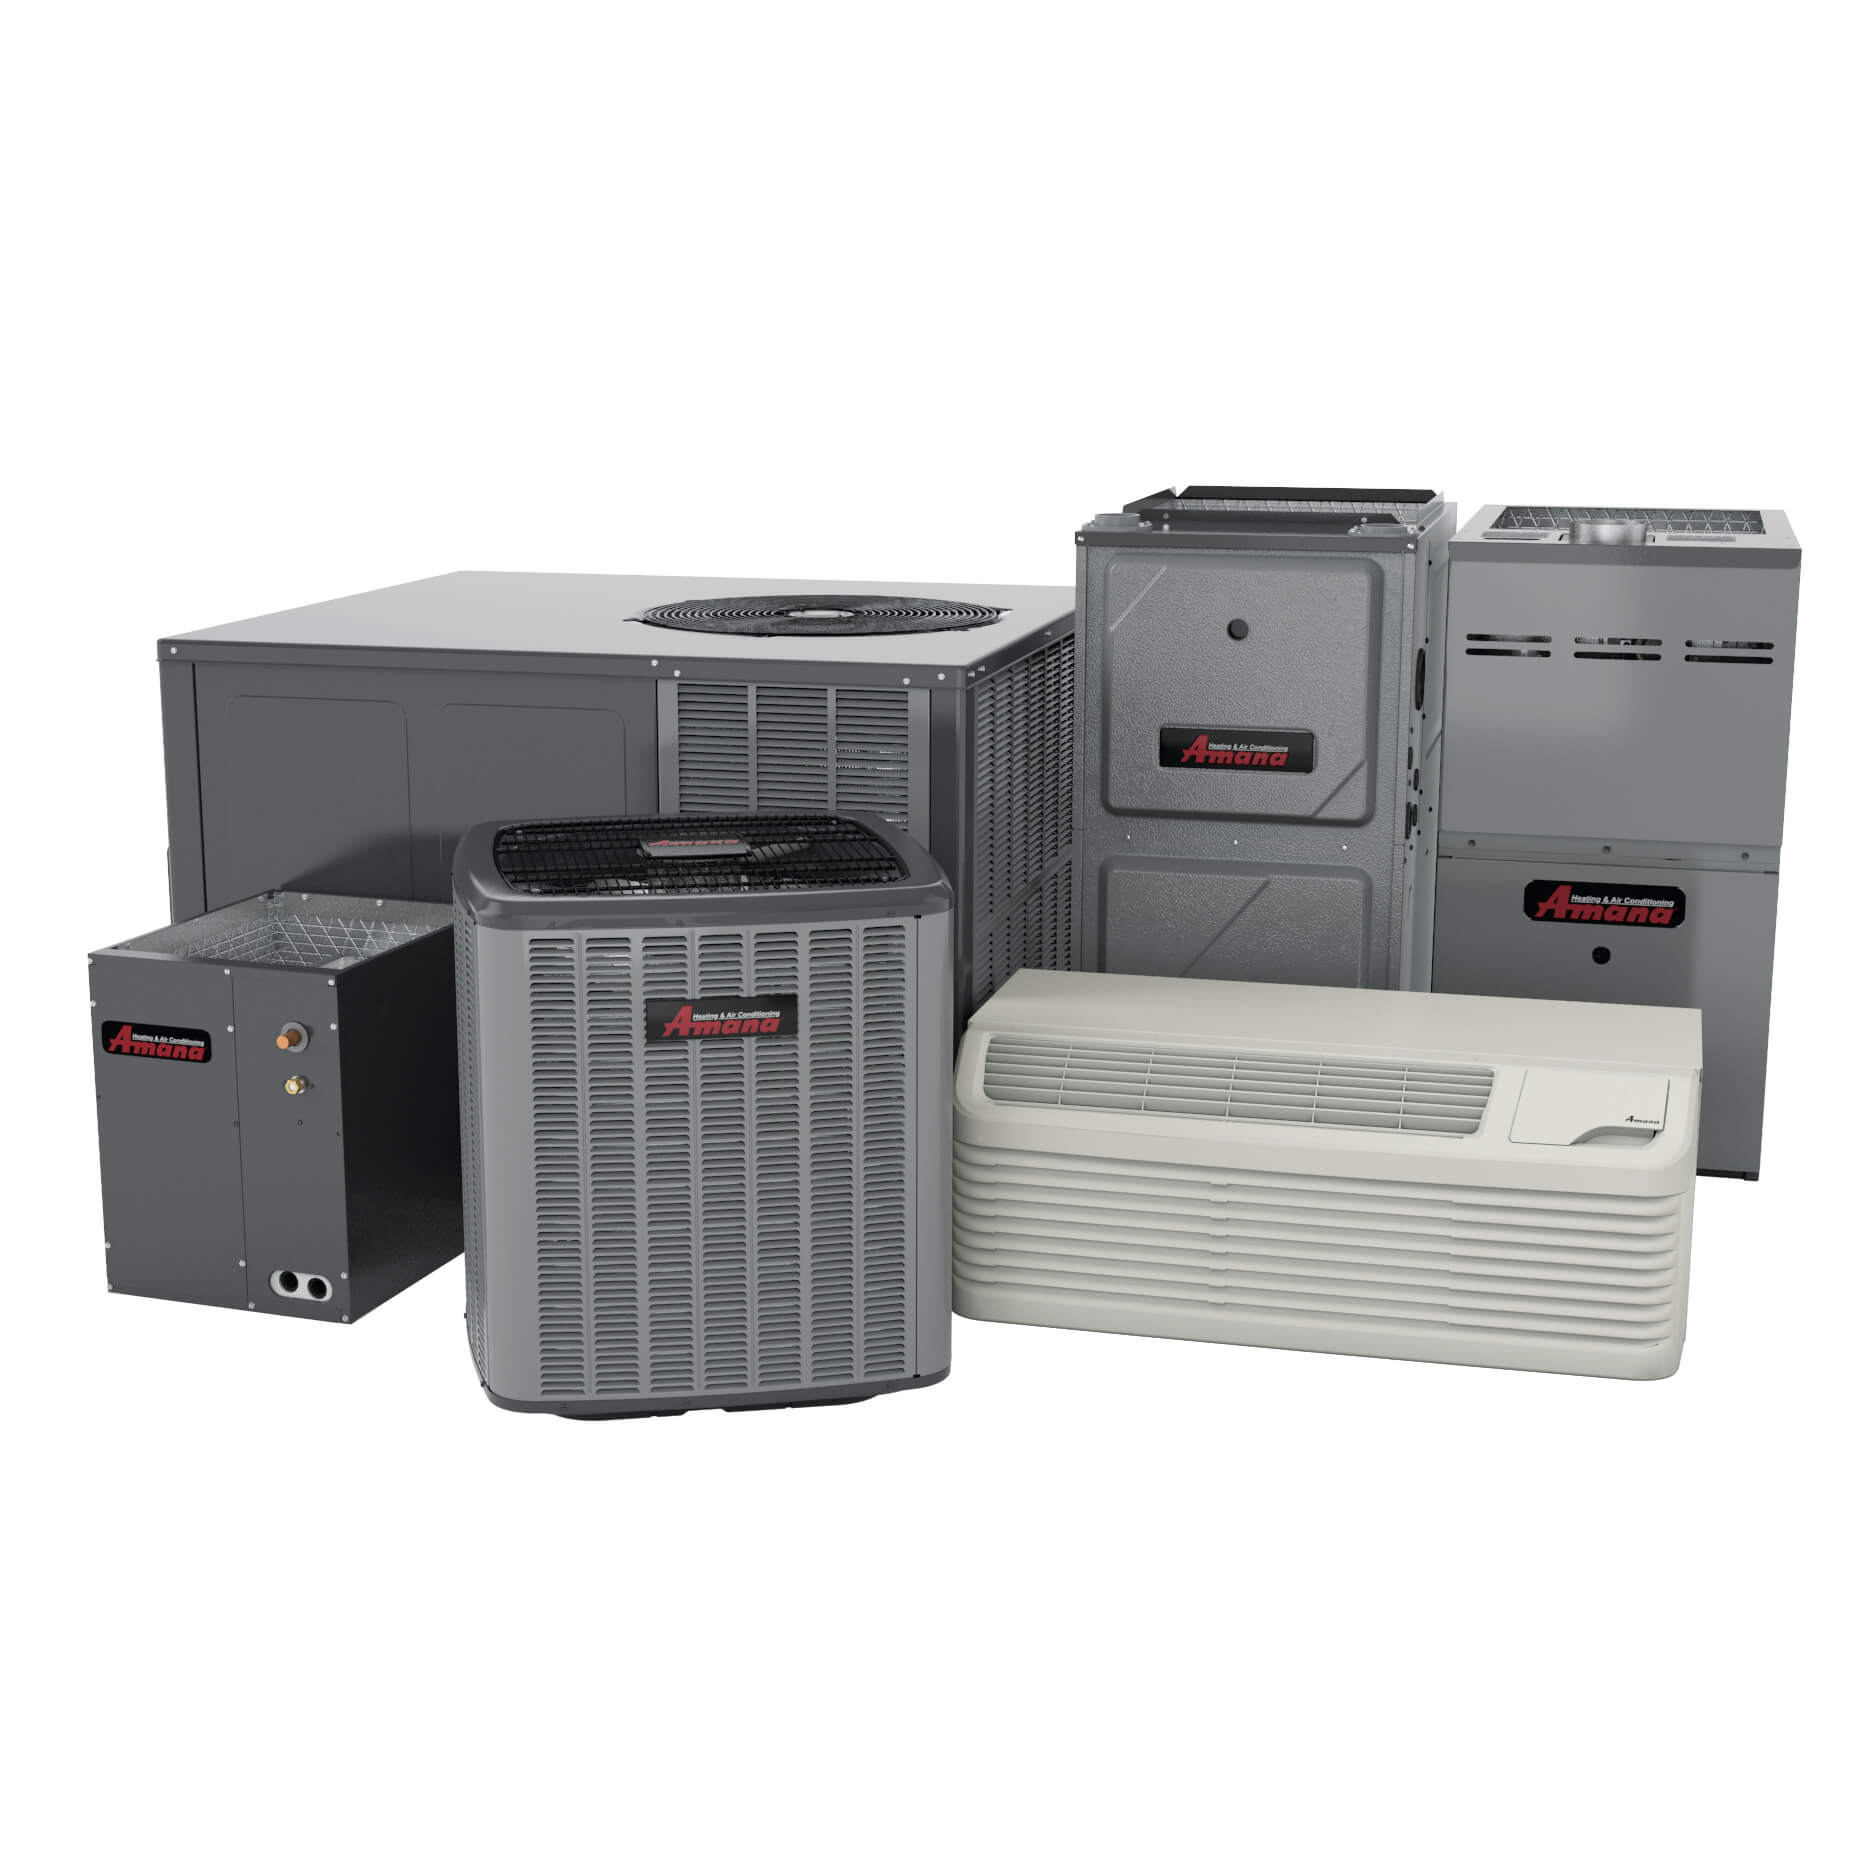 How To Turn On Amana Heating And Air Conditioning